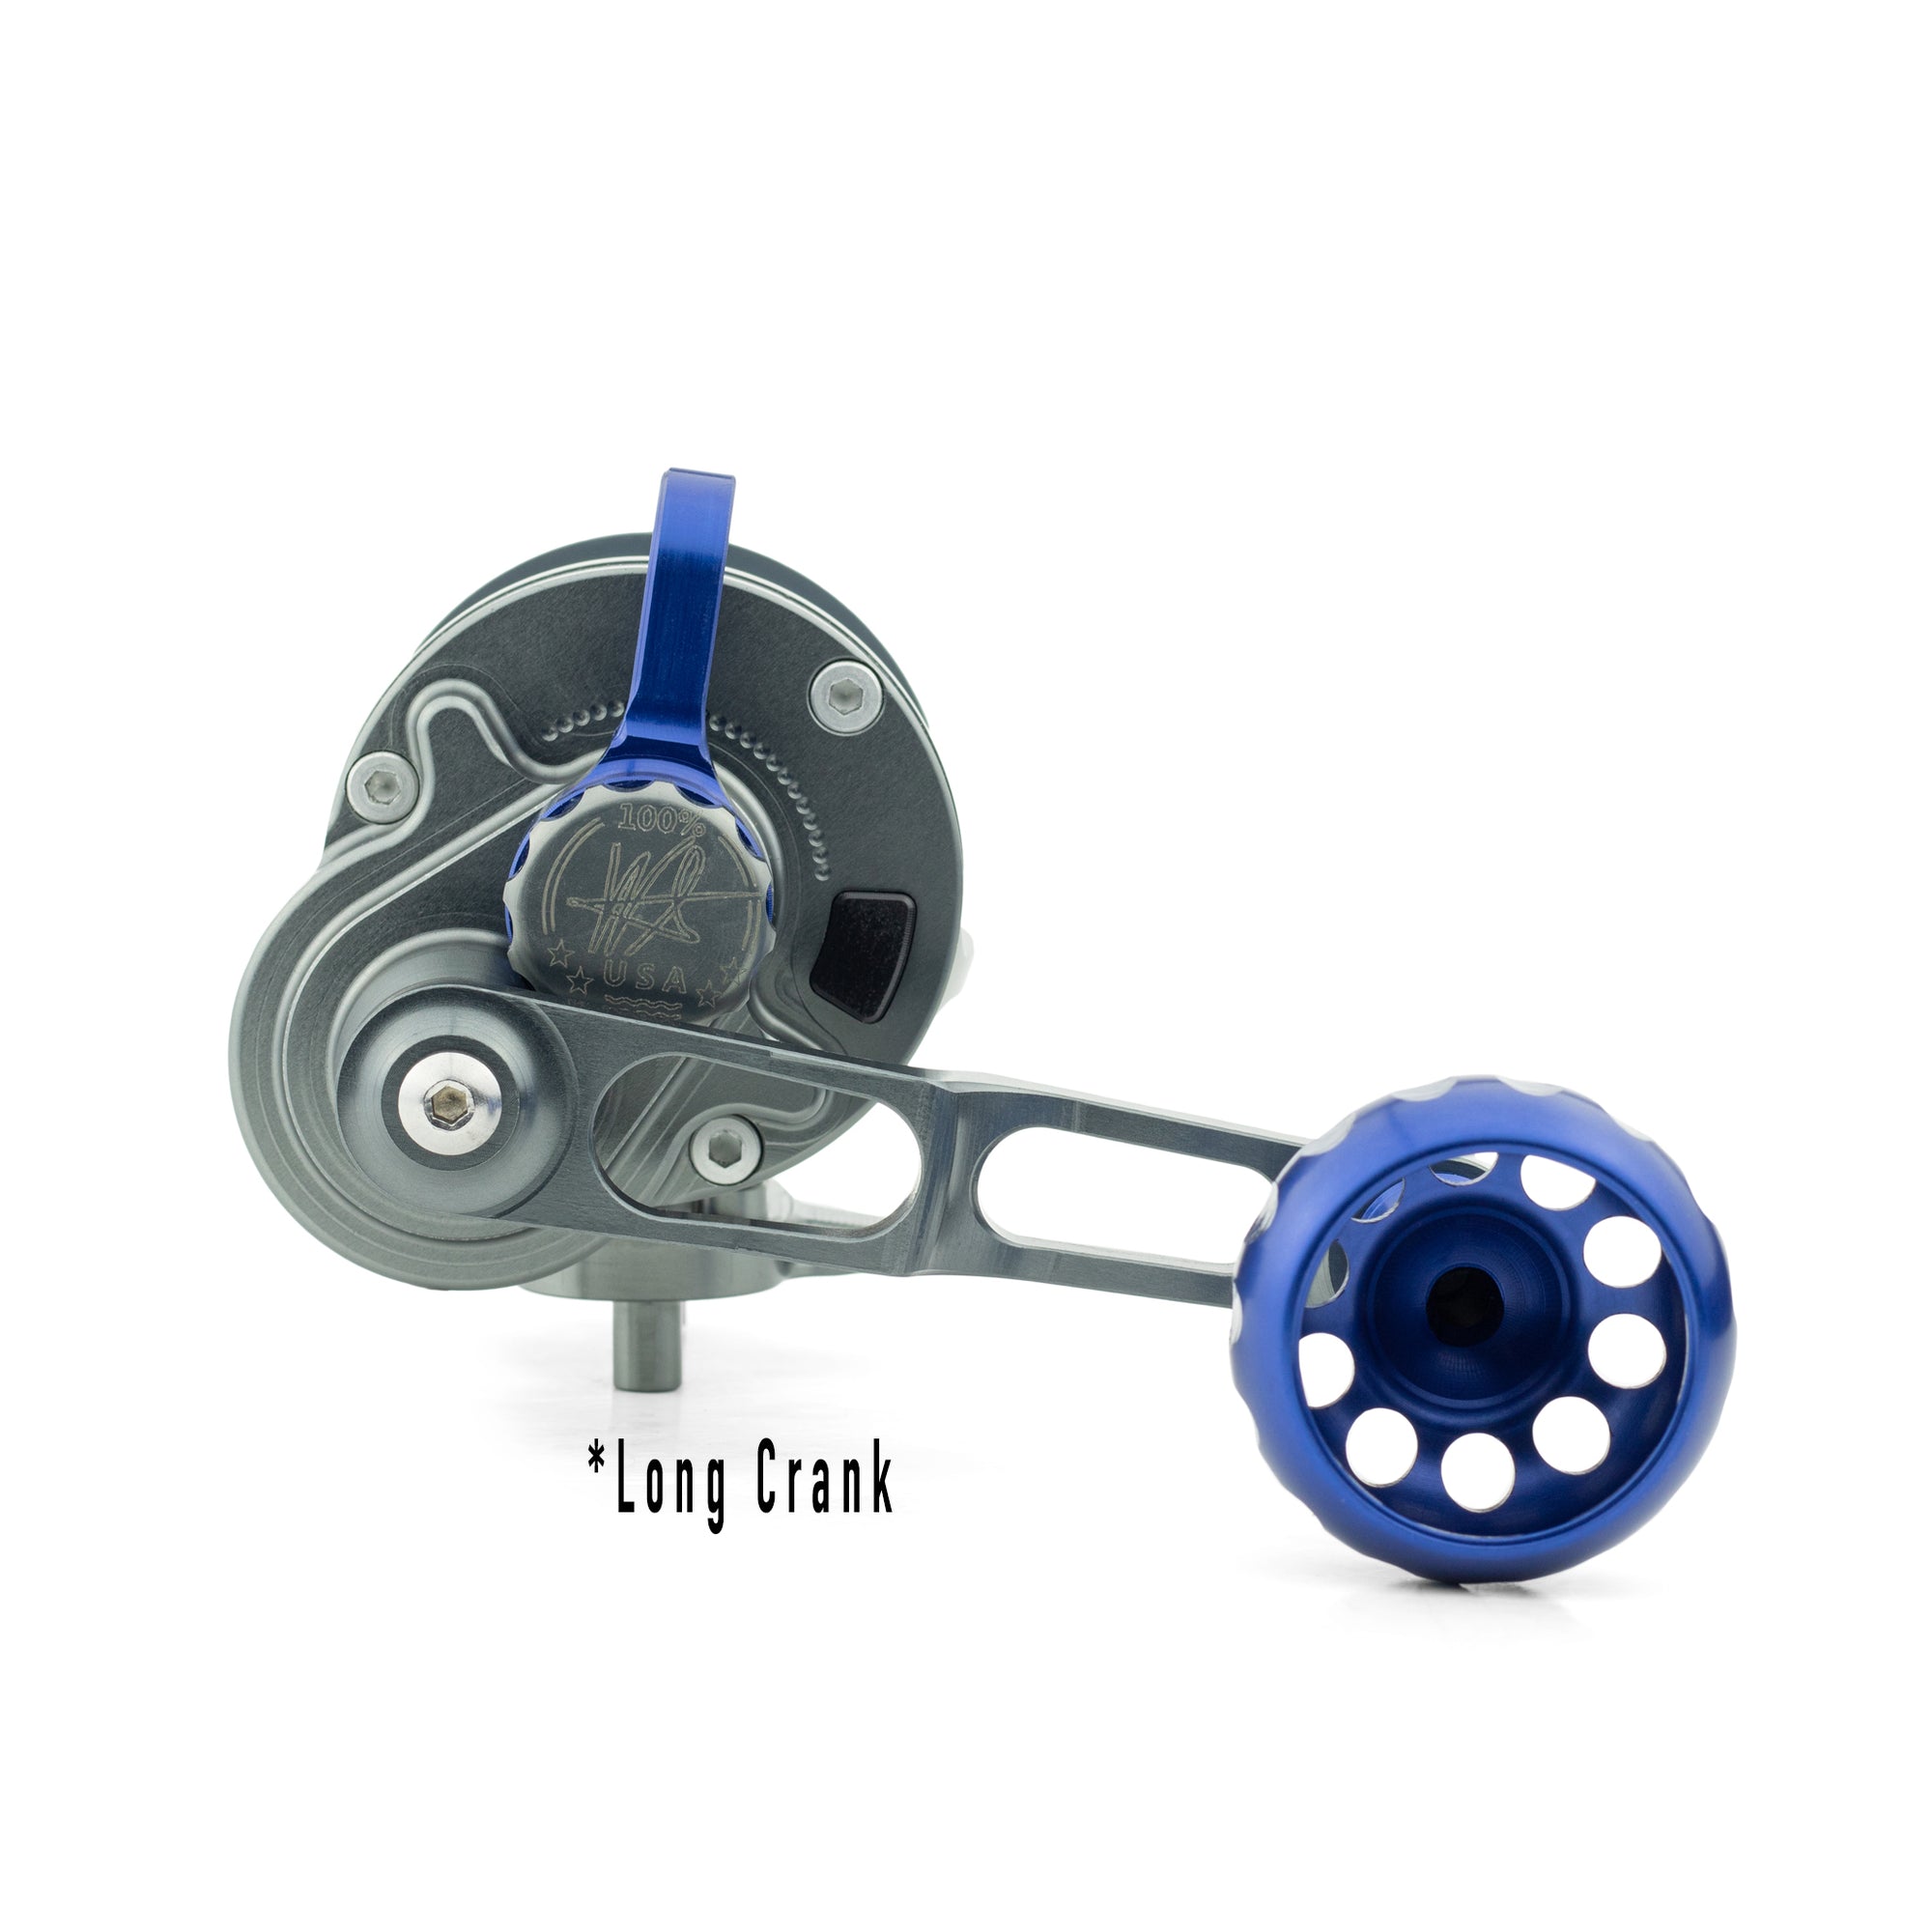 SEiGLER Small Game Narrow Conventional Reel 6:1 Smoke Blue RH : Sports &  Outdoors 